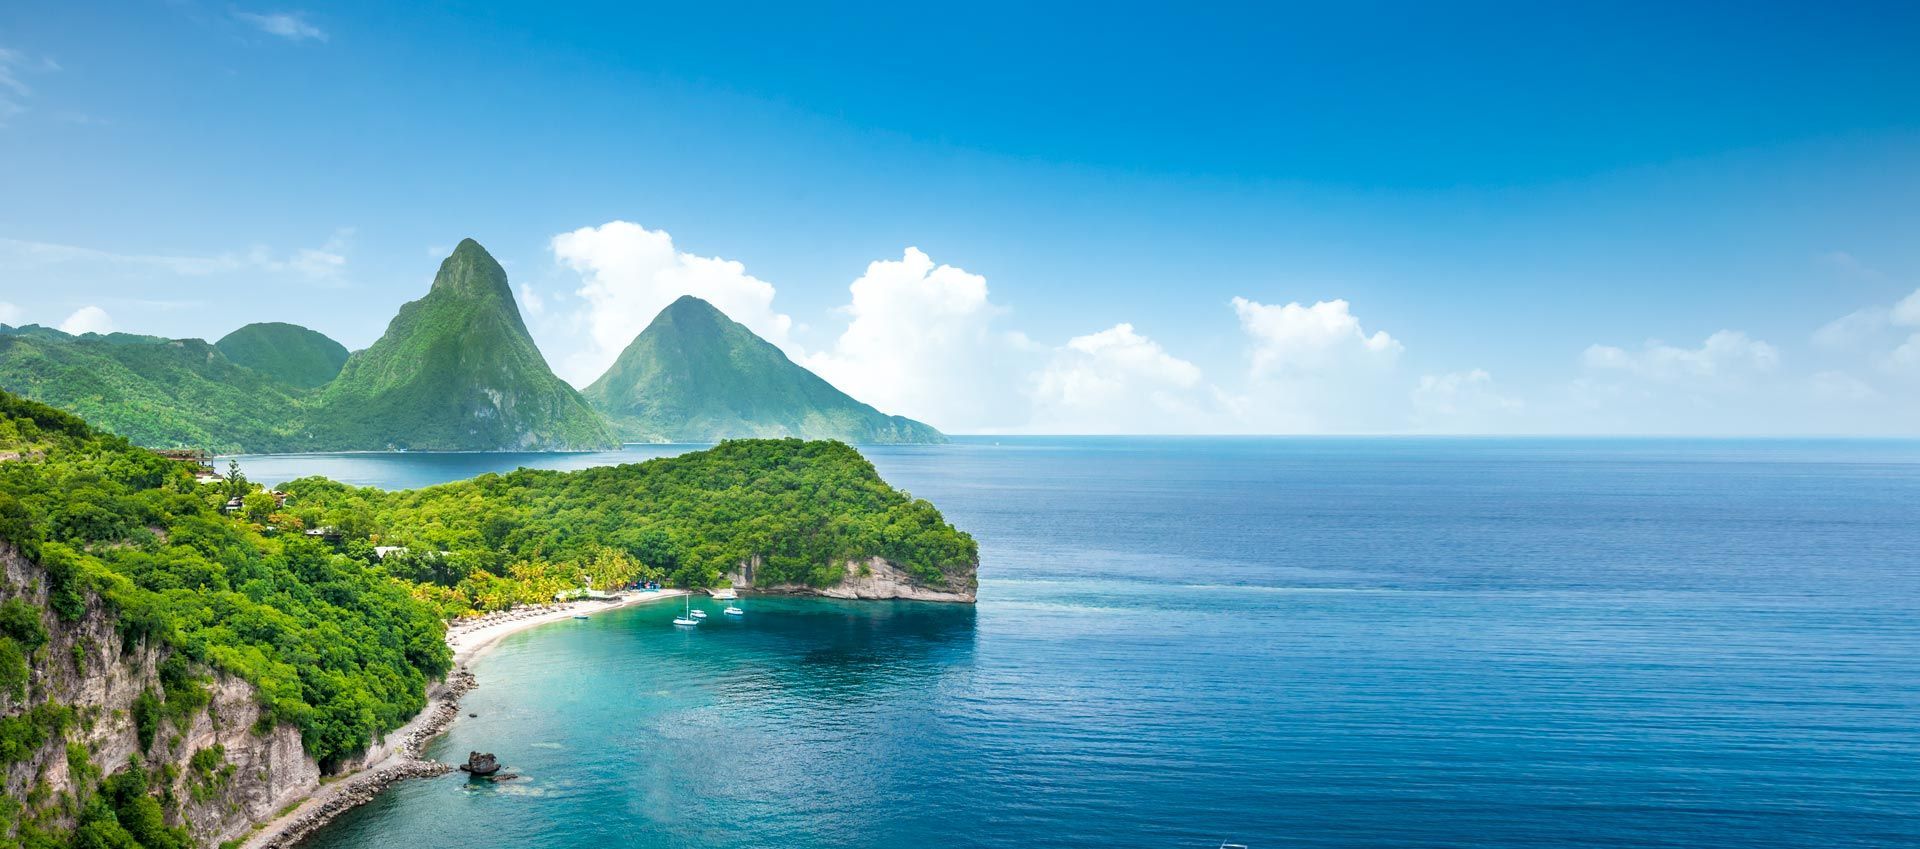 Fun And Interesting Facts About St. Lucia